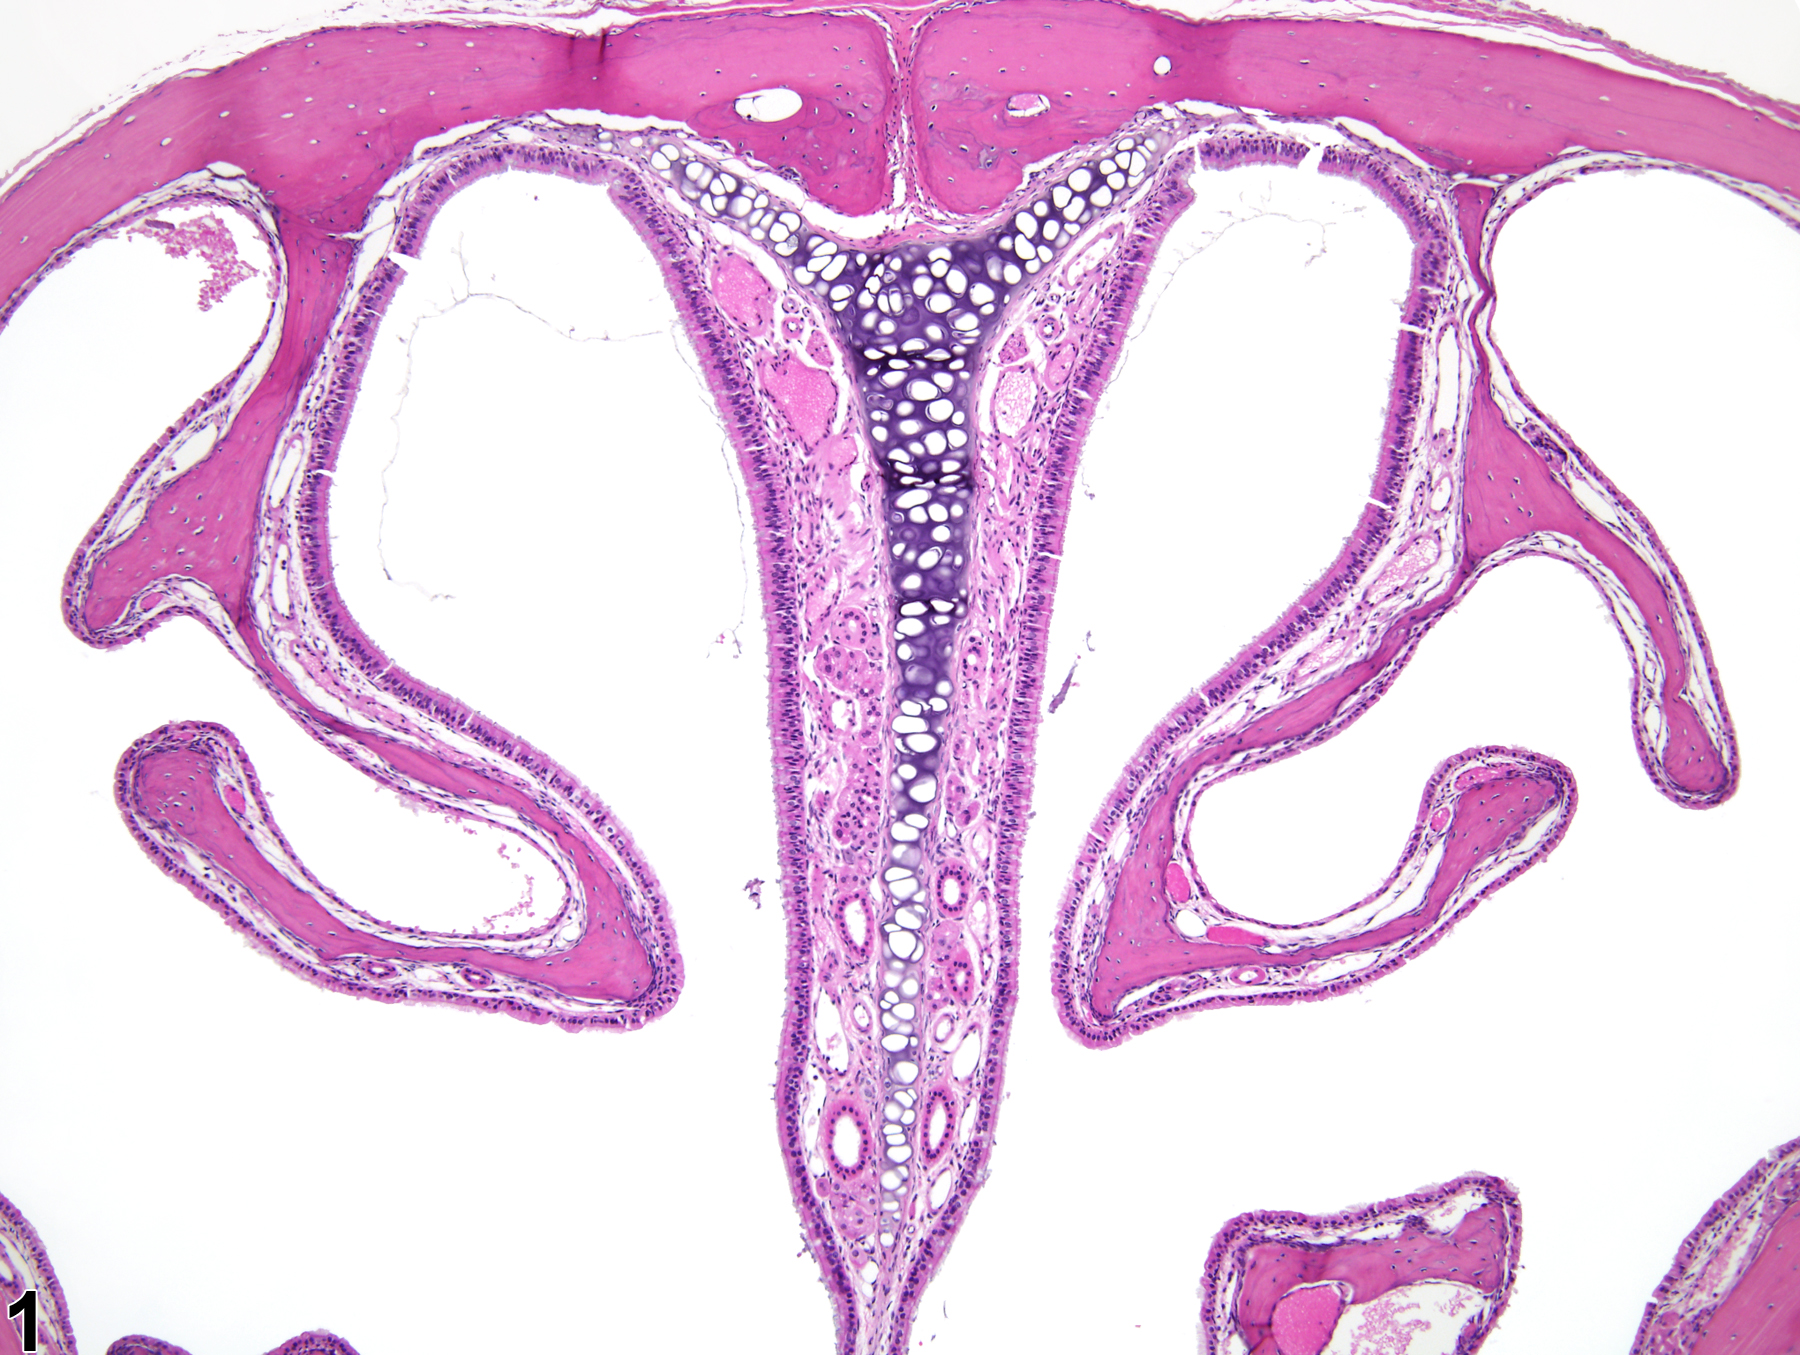 Image of atrophy in the nose, turbinate from a male B6C3F1/N mouse in a subchronic study